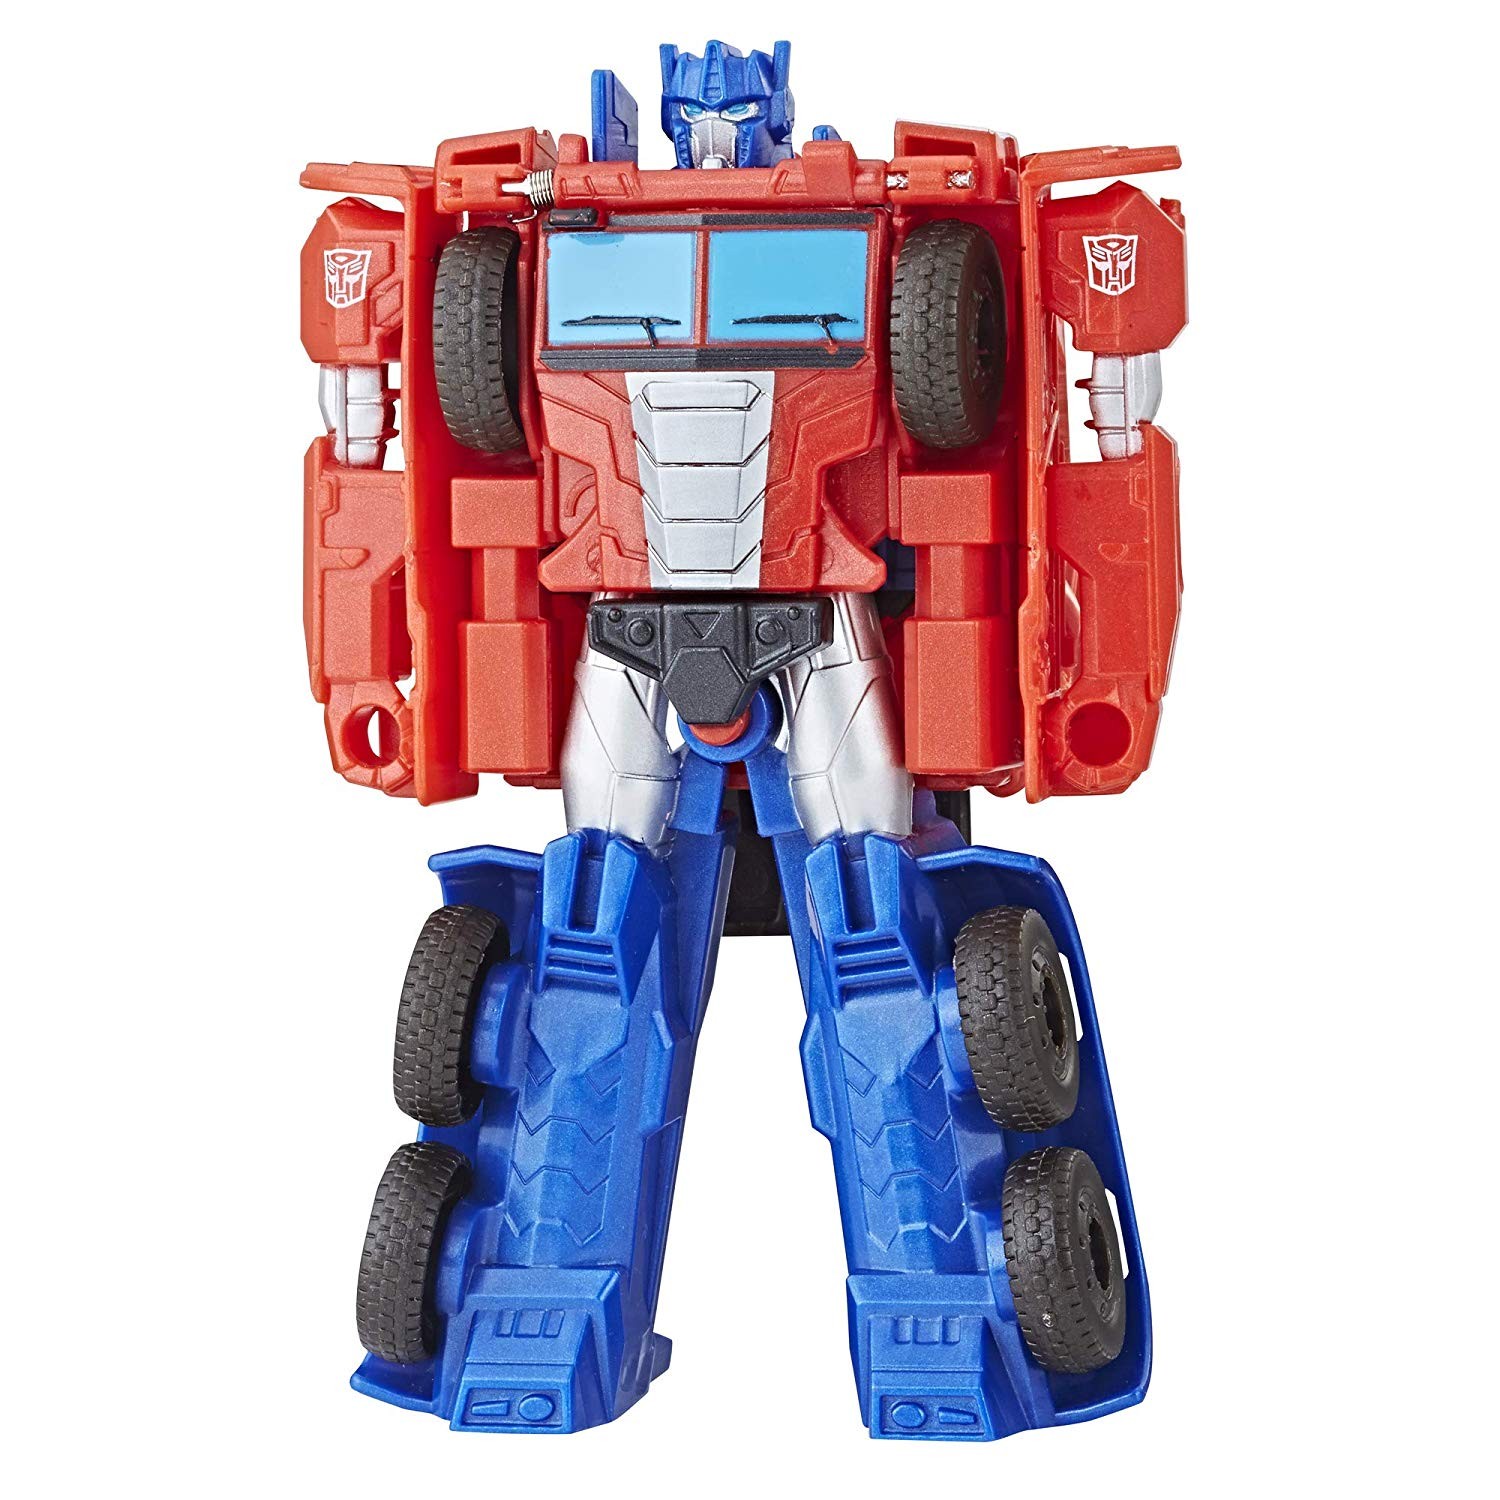 Transformers News: Transformers MPM Ironhide and Cyberverse Wave 2 One Steps Available for Pre-Order on Amazon